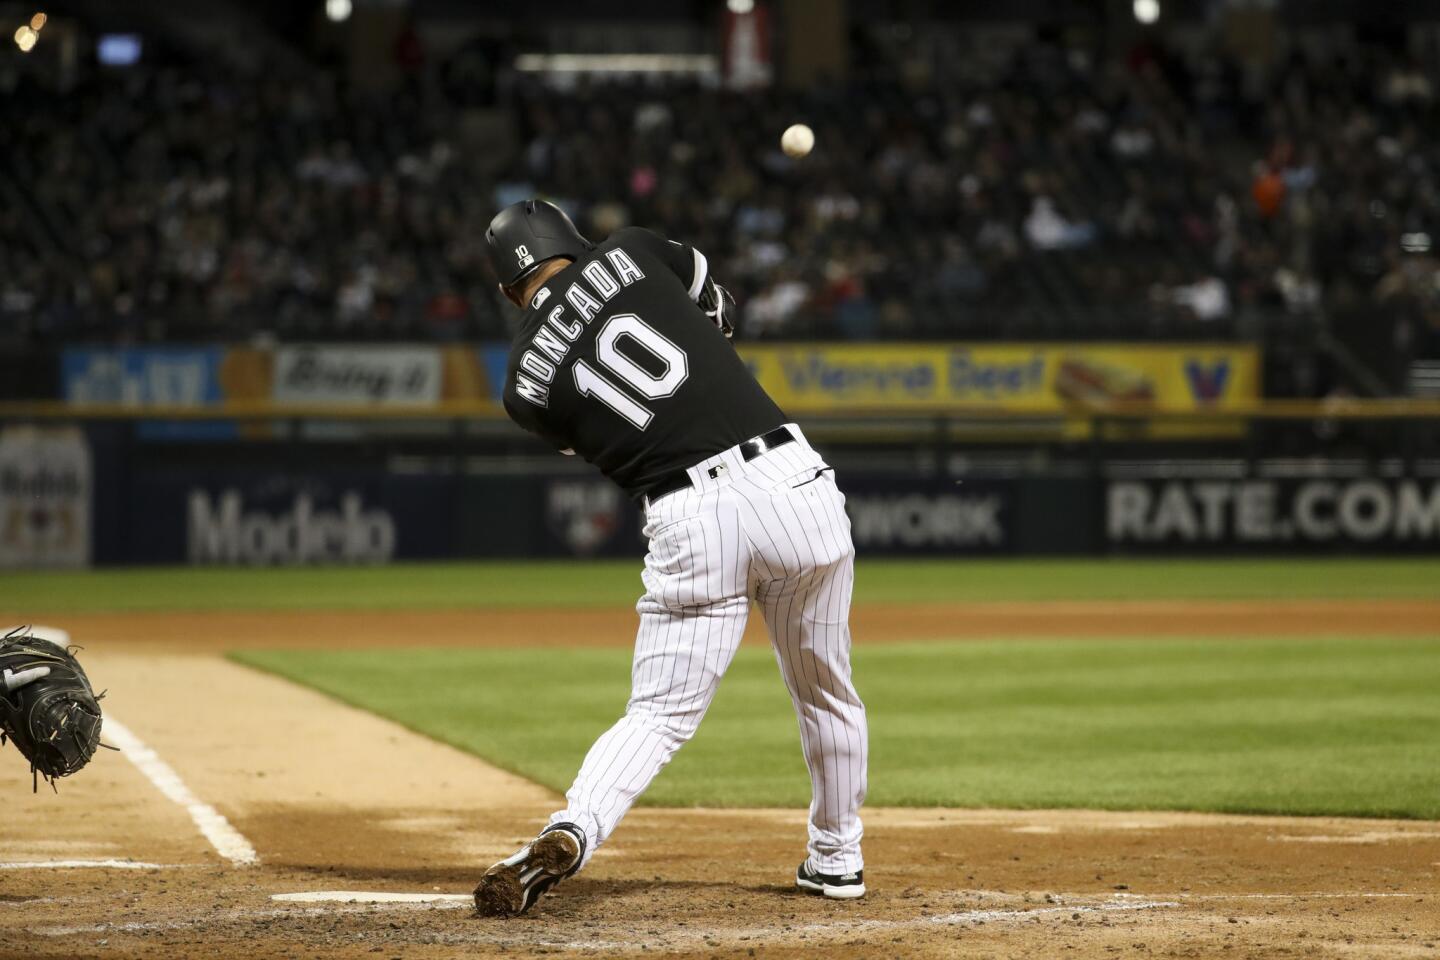 White Sox, Yoan Moncada still getting to know one another - The